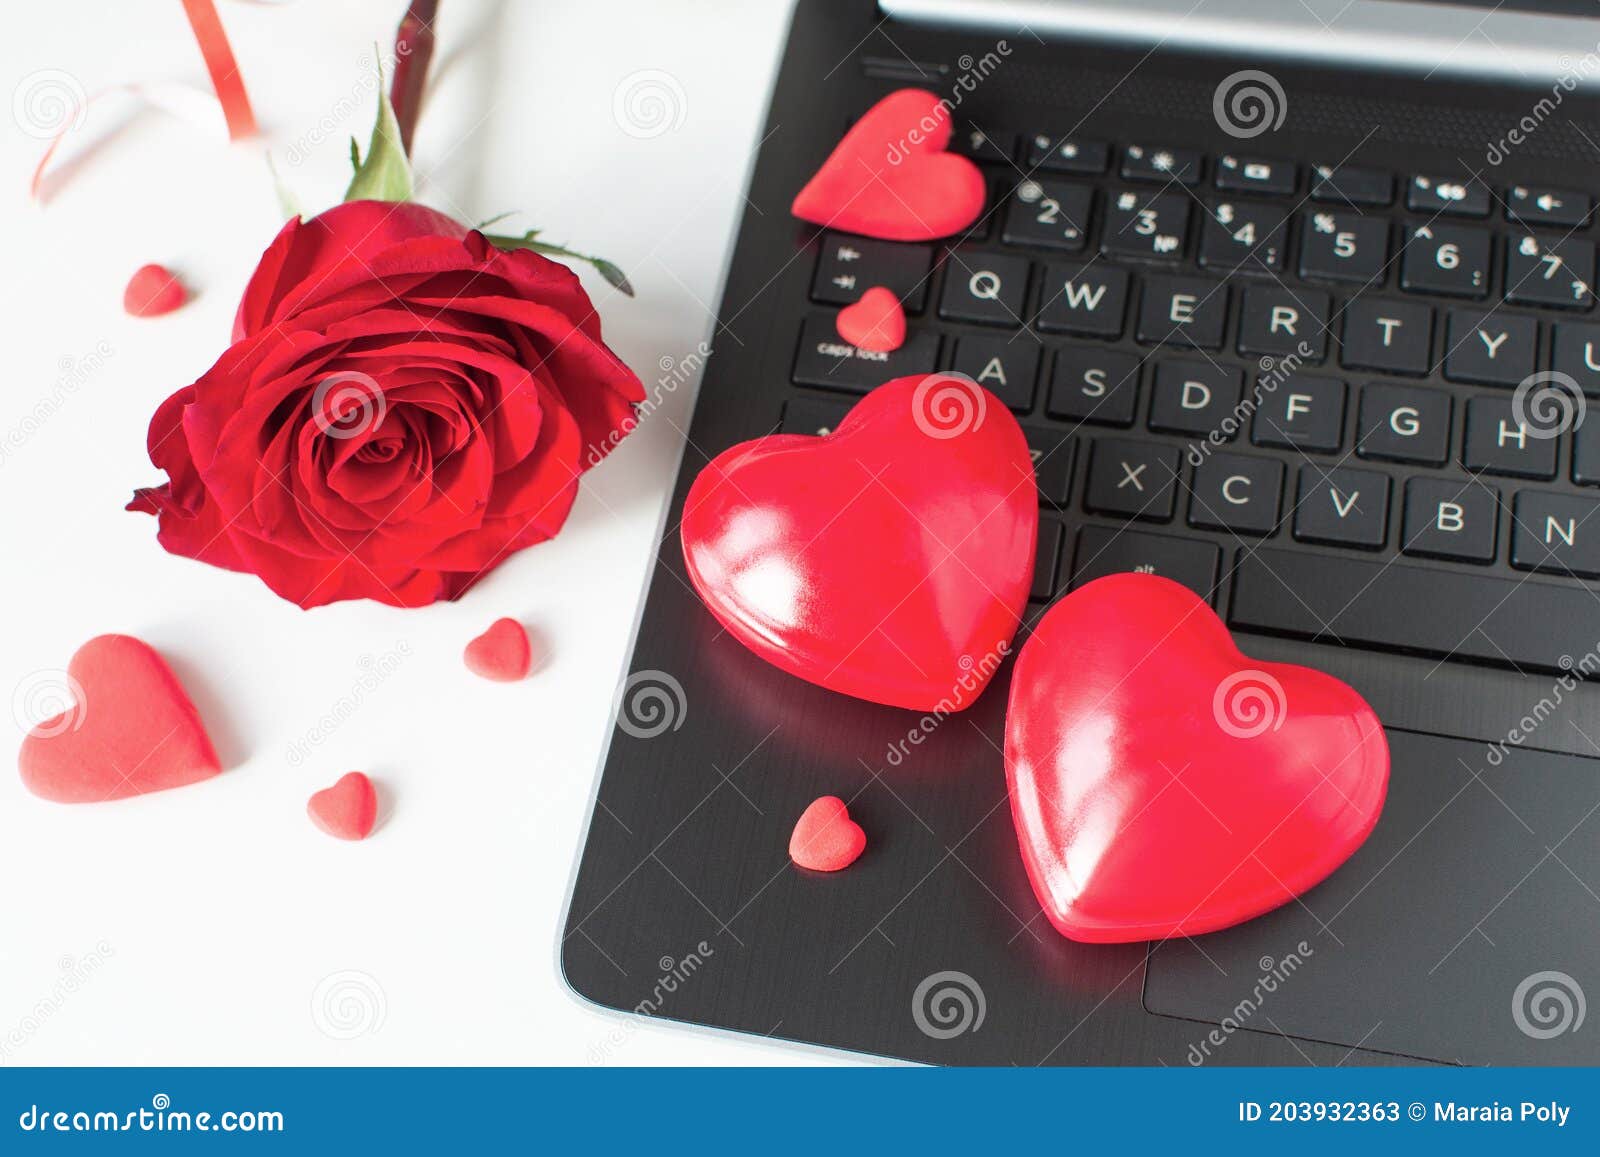 https://thumbs.dreamstime.com/z/valentine-day-online-shopping-online-communication-virtual-love-laptop-red-hearts-red-rose-romantic-shopping-wedding-women-203932363.jpg